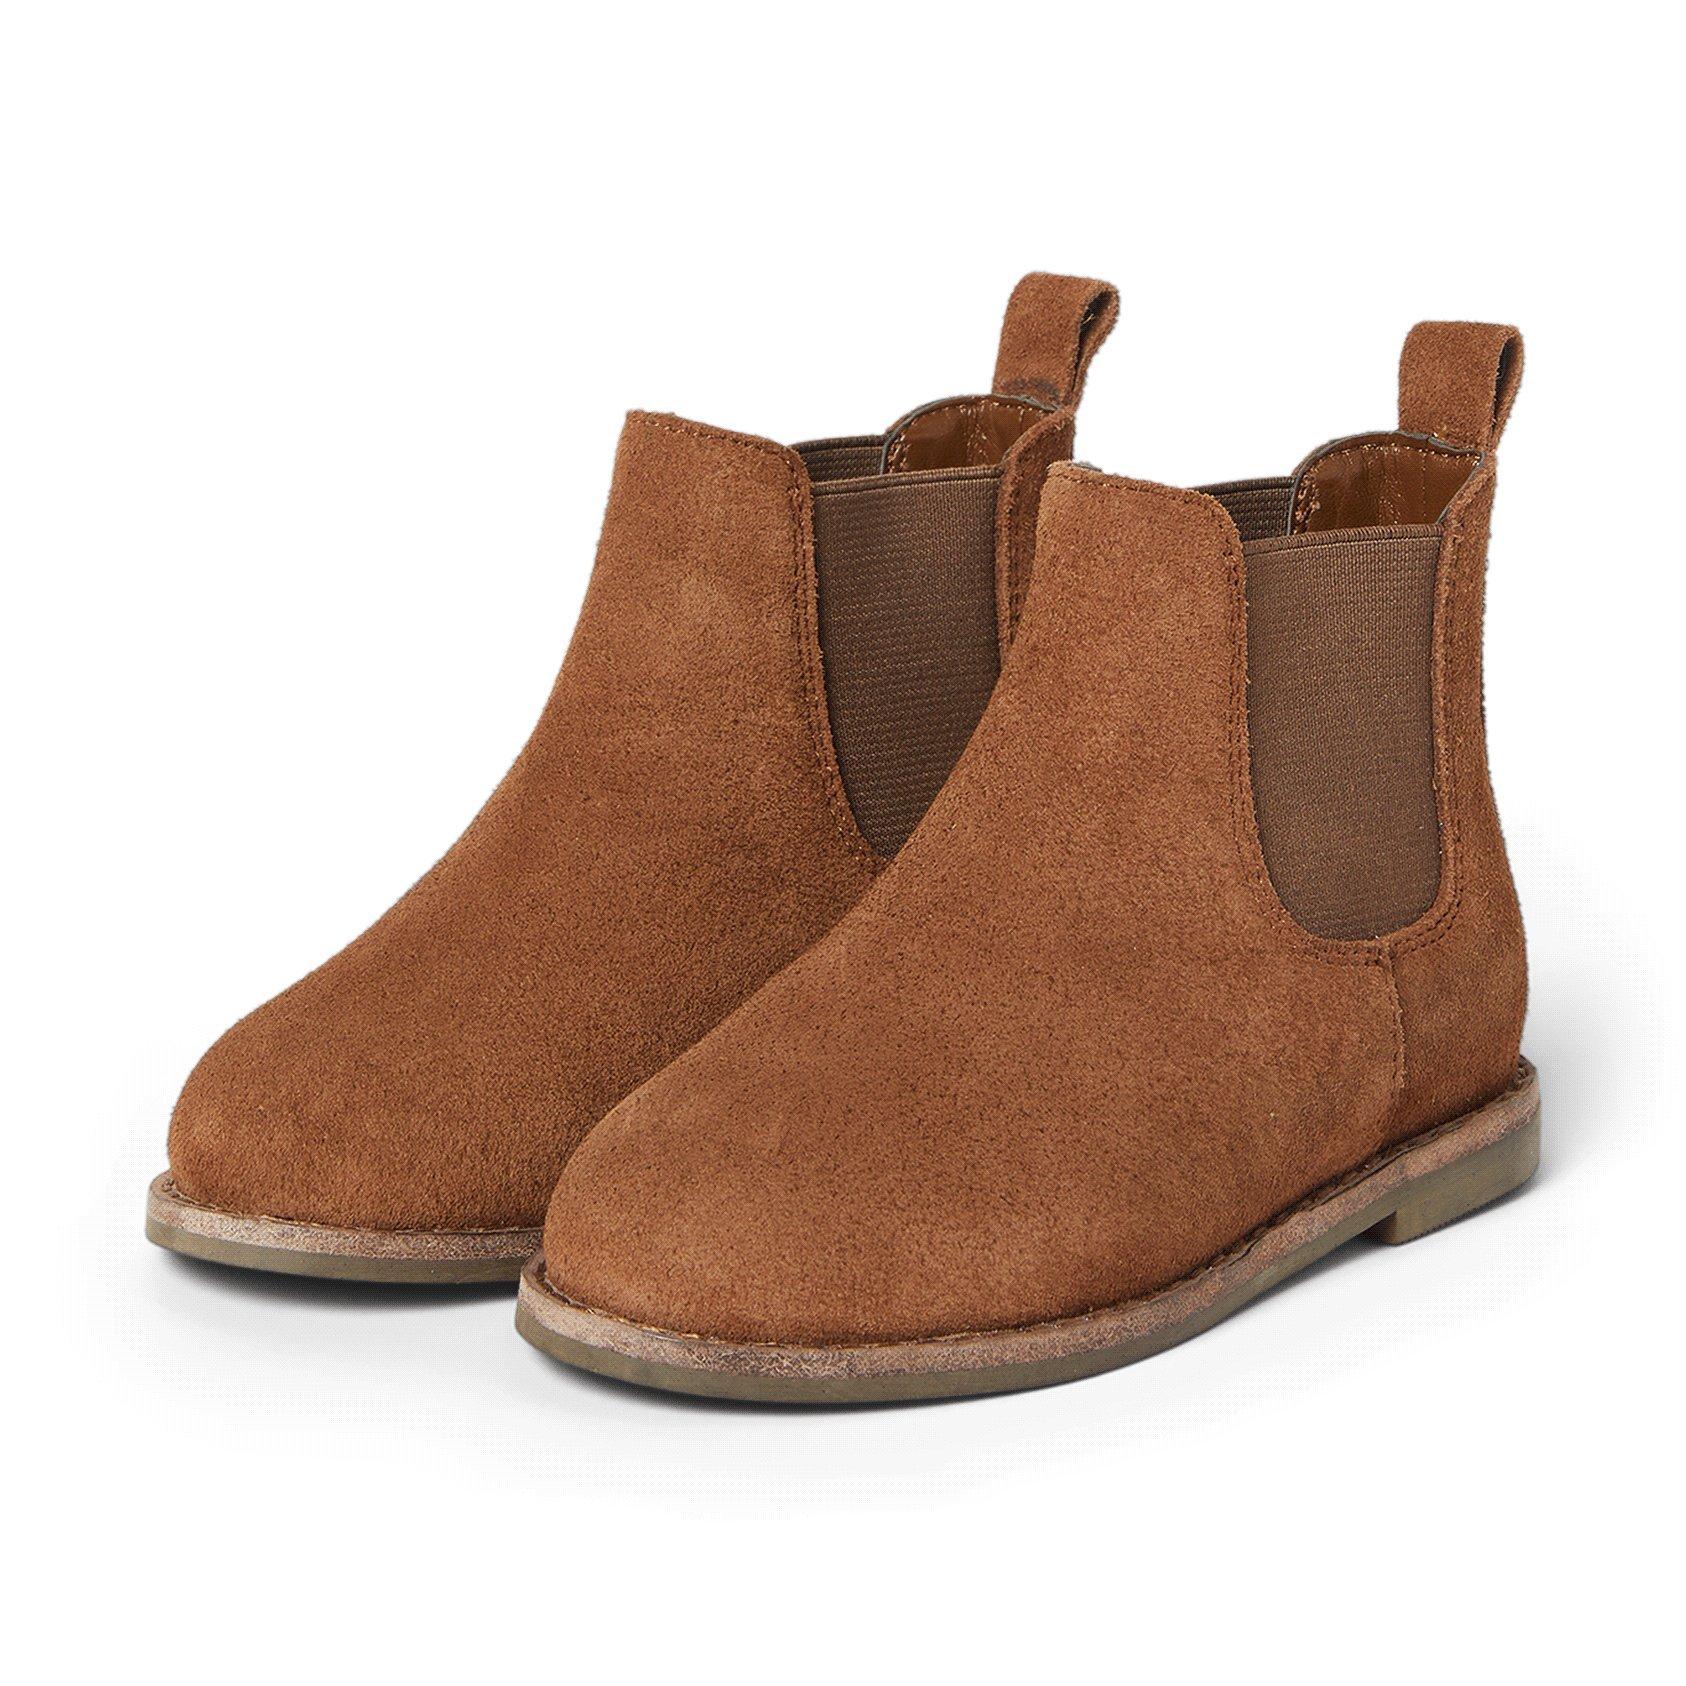 The Suede Chelsea Boot 